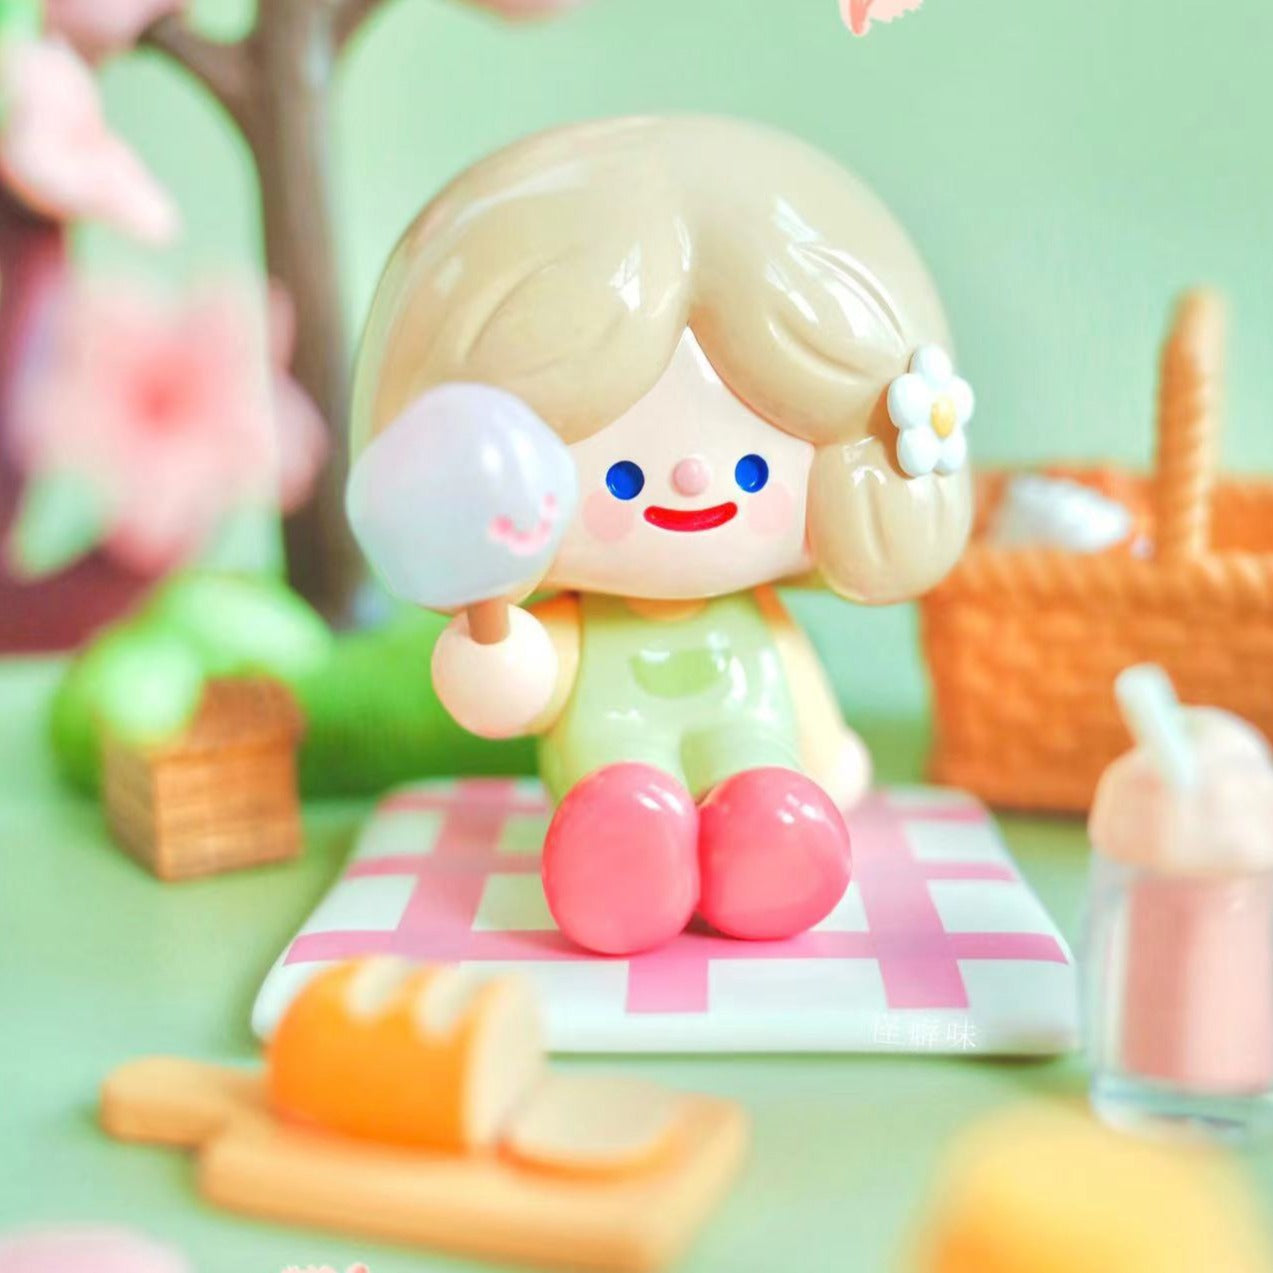 Rico happy picnic together series blind-box figures toy